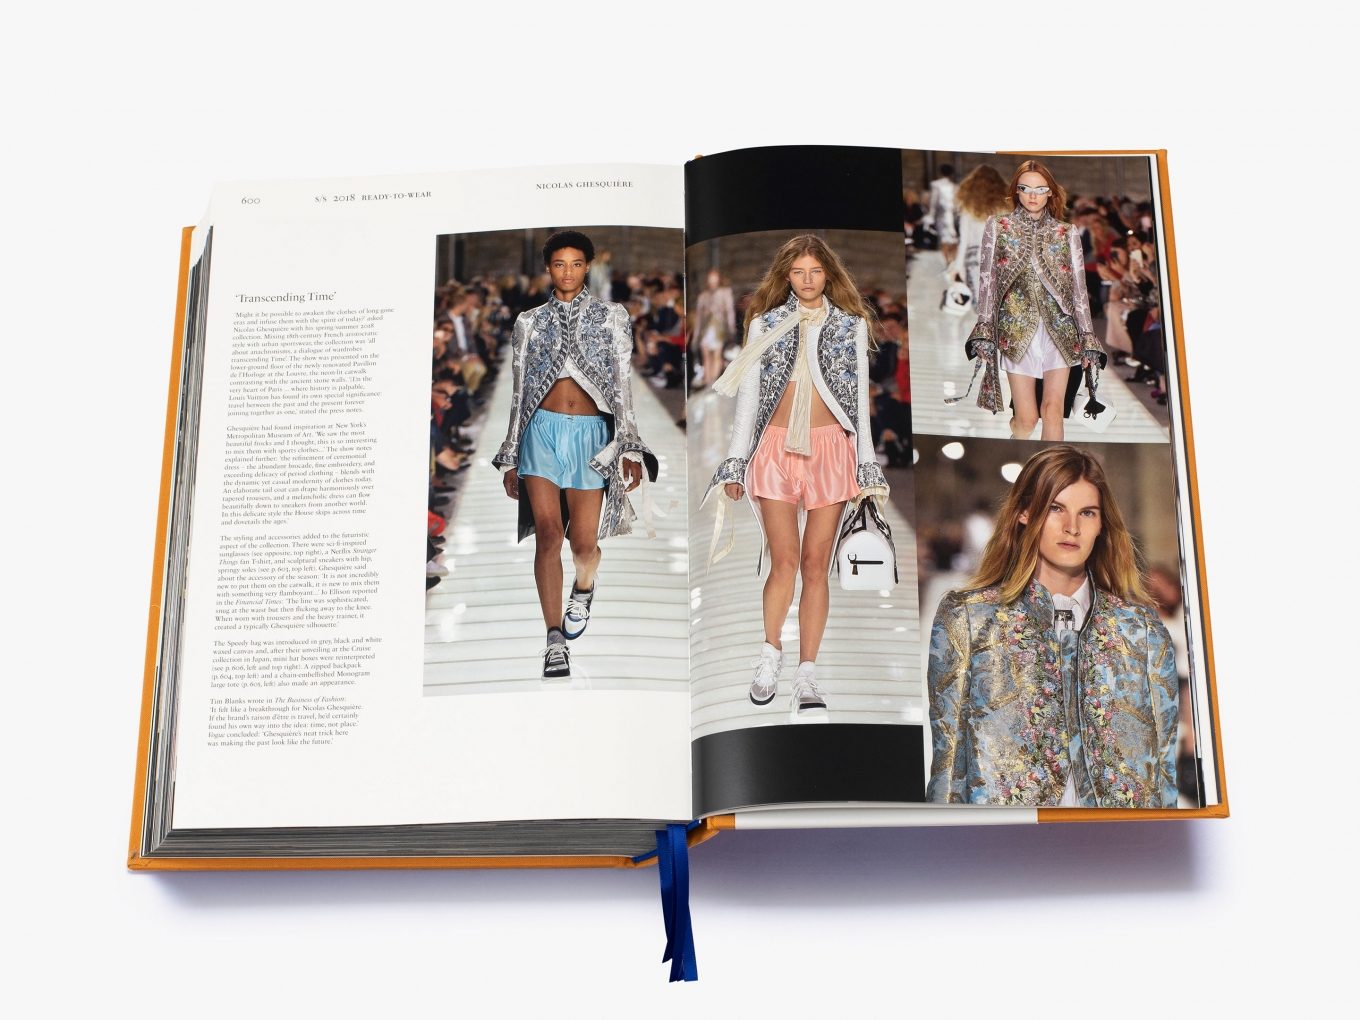 Louis Vuitton Catwalk Book - the musthave reference for all fashion  professionals and Louis Vuitton fans